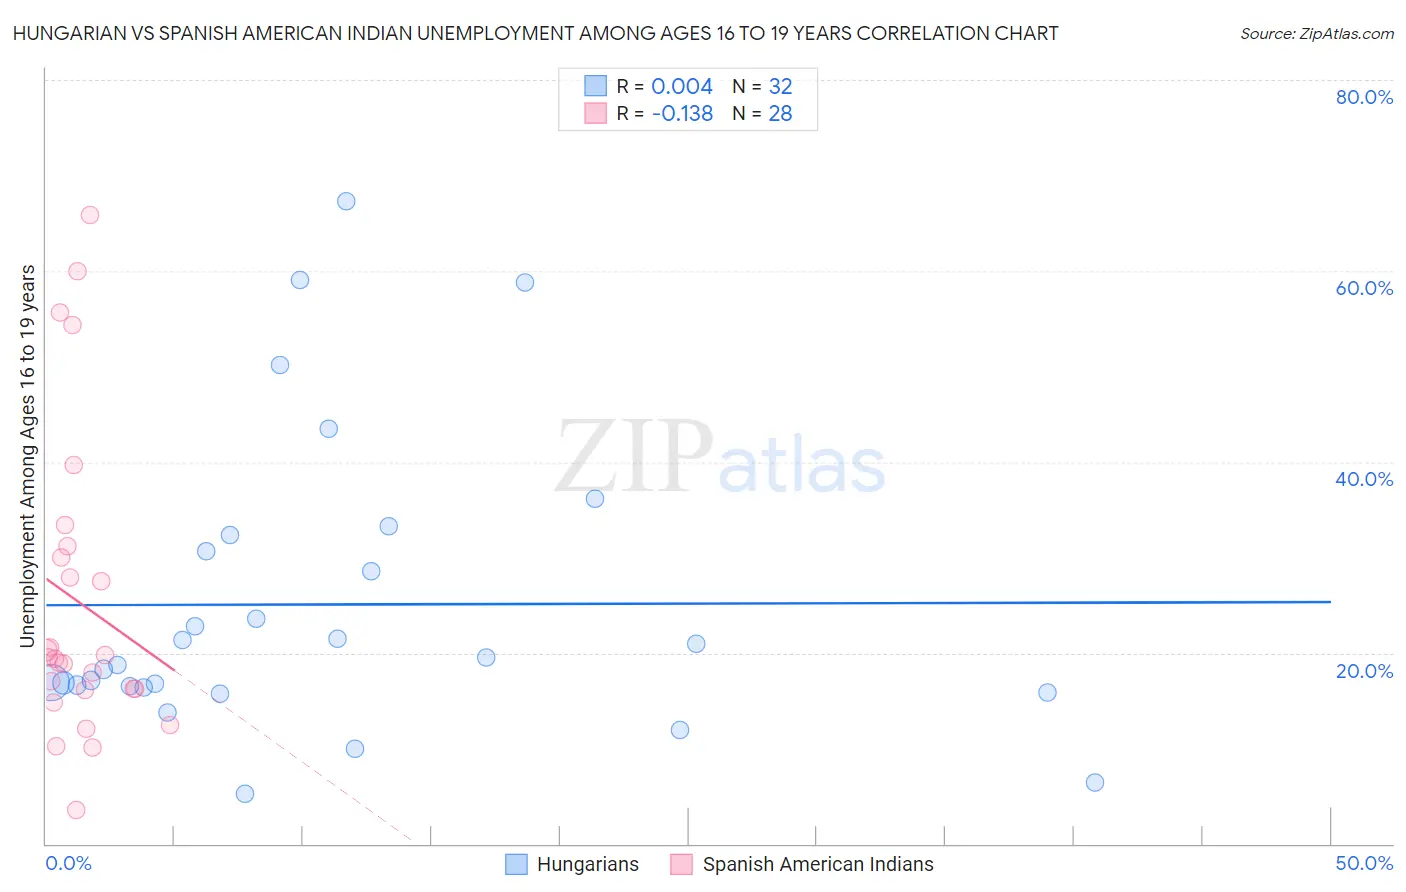 Hungarian vs Spanish American Indian Unemployment Among Ages 16 to 19 years